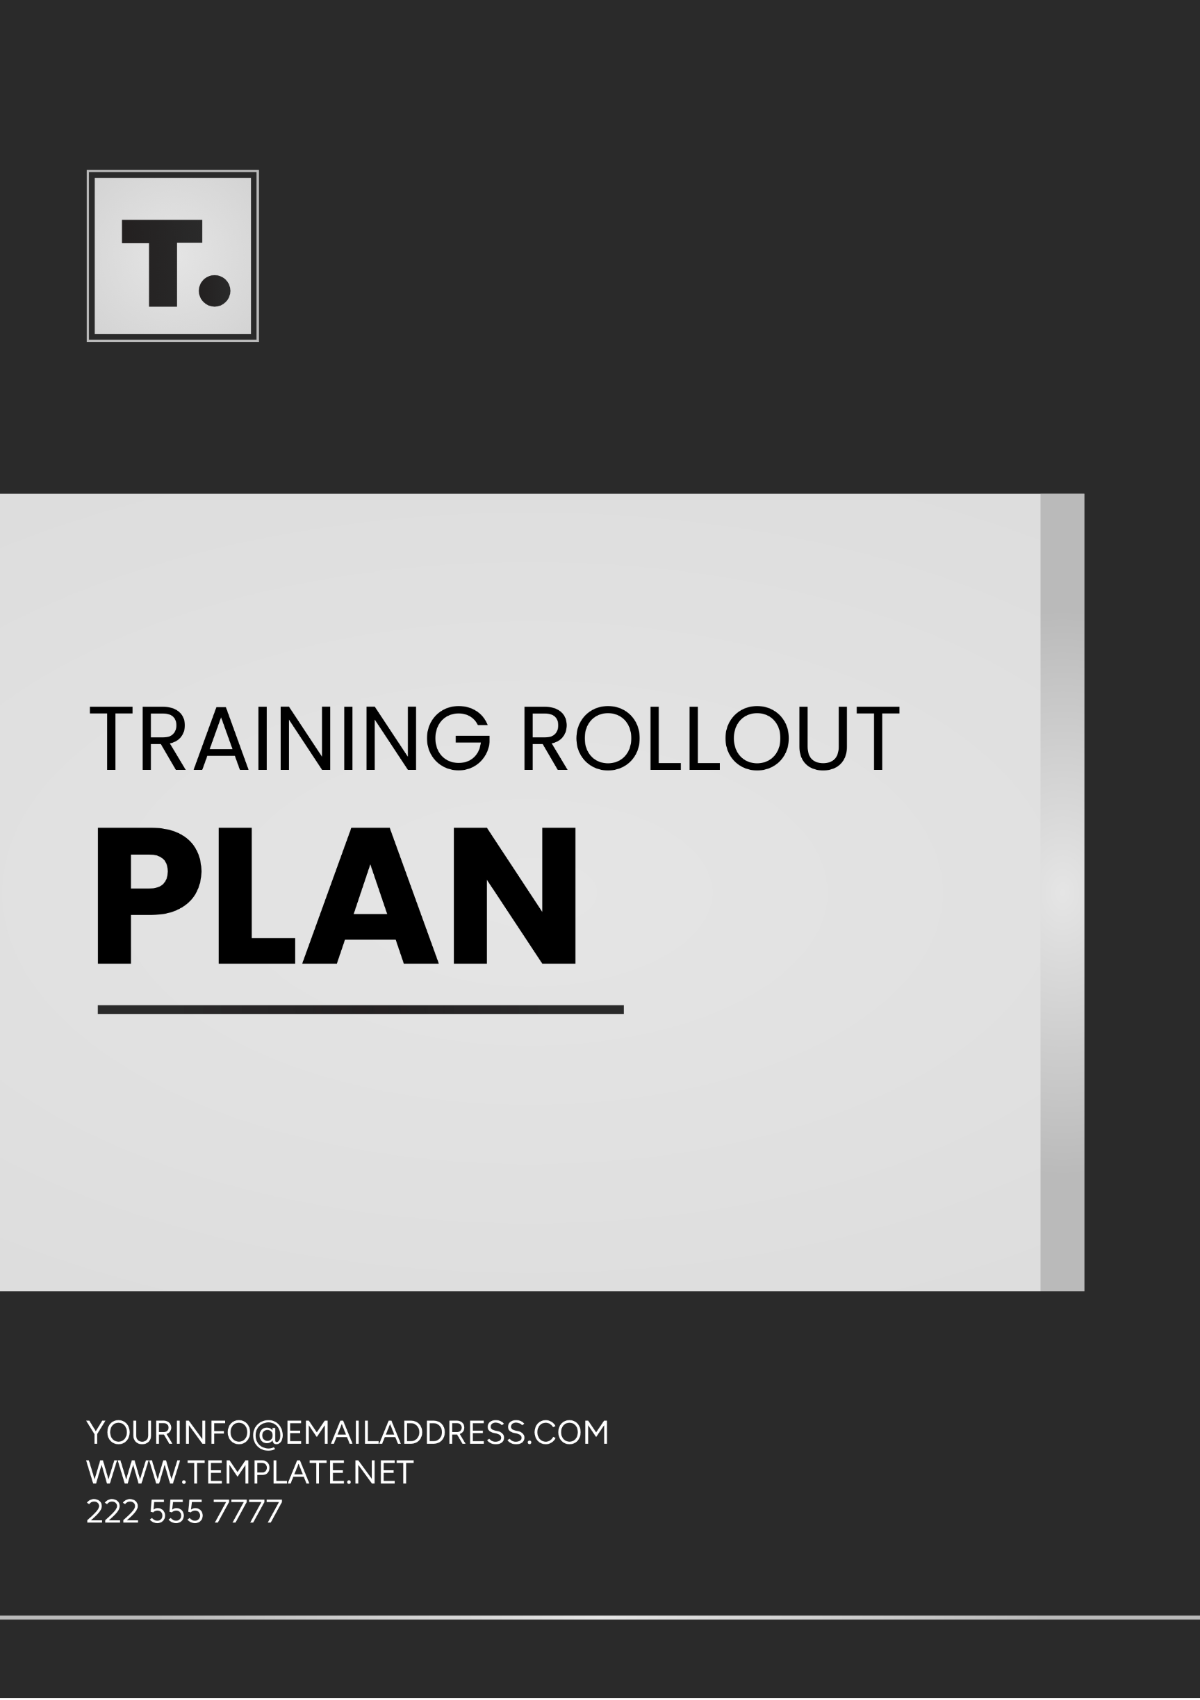 Training Rollout Plan Template